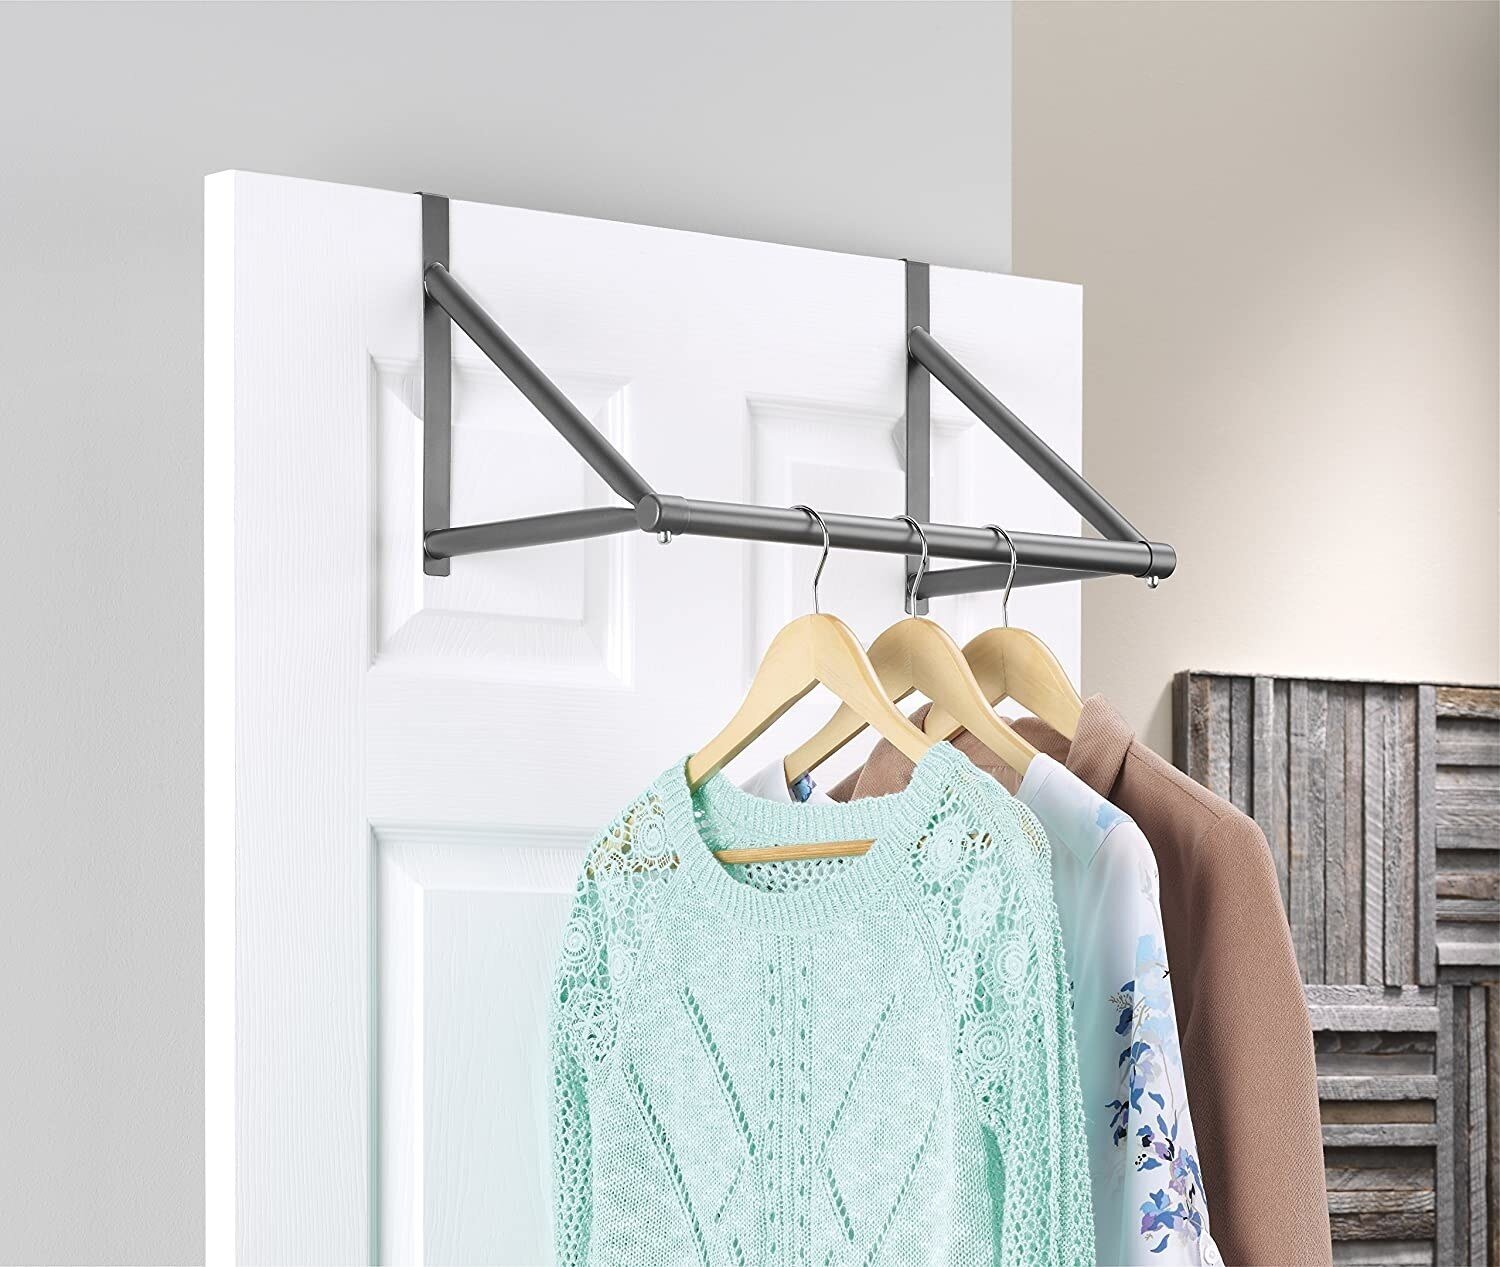 Space Saving Clothes Hanger 22 Arms Steel Double Row Pants Rack Towel Rack Pull Out Pants Hanger Trouser Rack Sliding Rail Extendable Scarf Organizer Tie Rack with Non-Slip Flocking Hanging Rod 